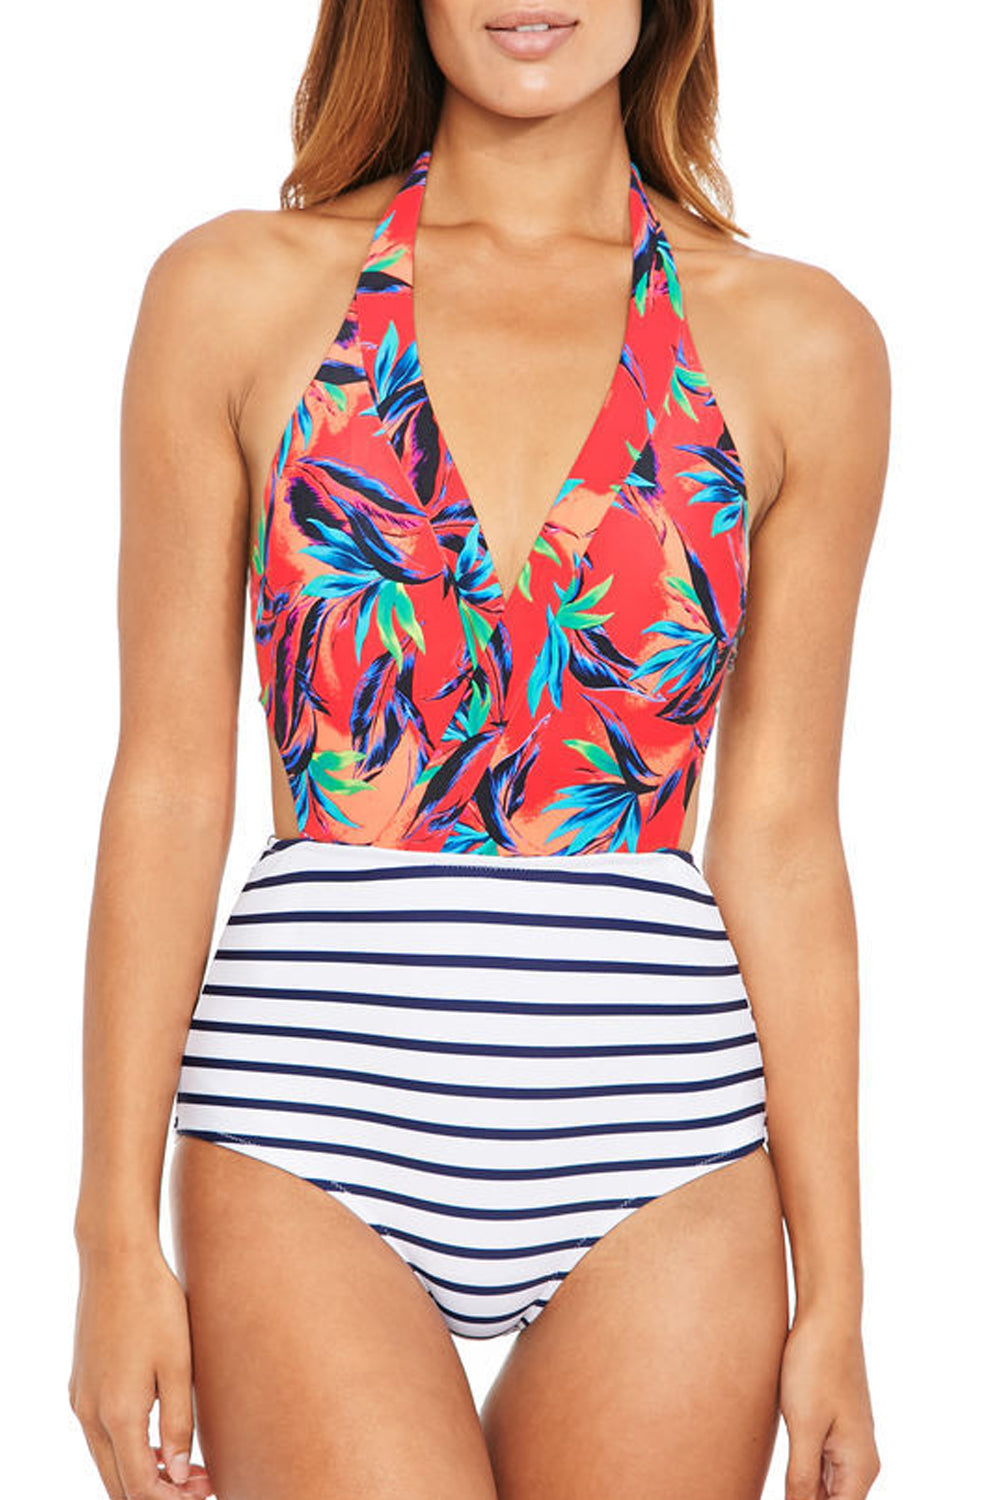 Iyasson Floral Print And Stripe Design One-piece Swimsuit